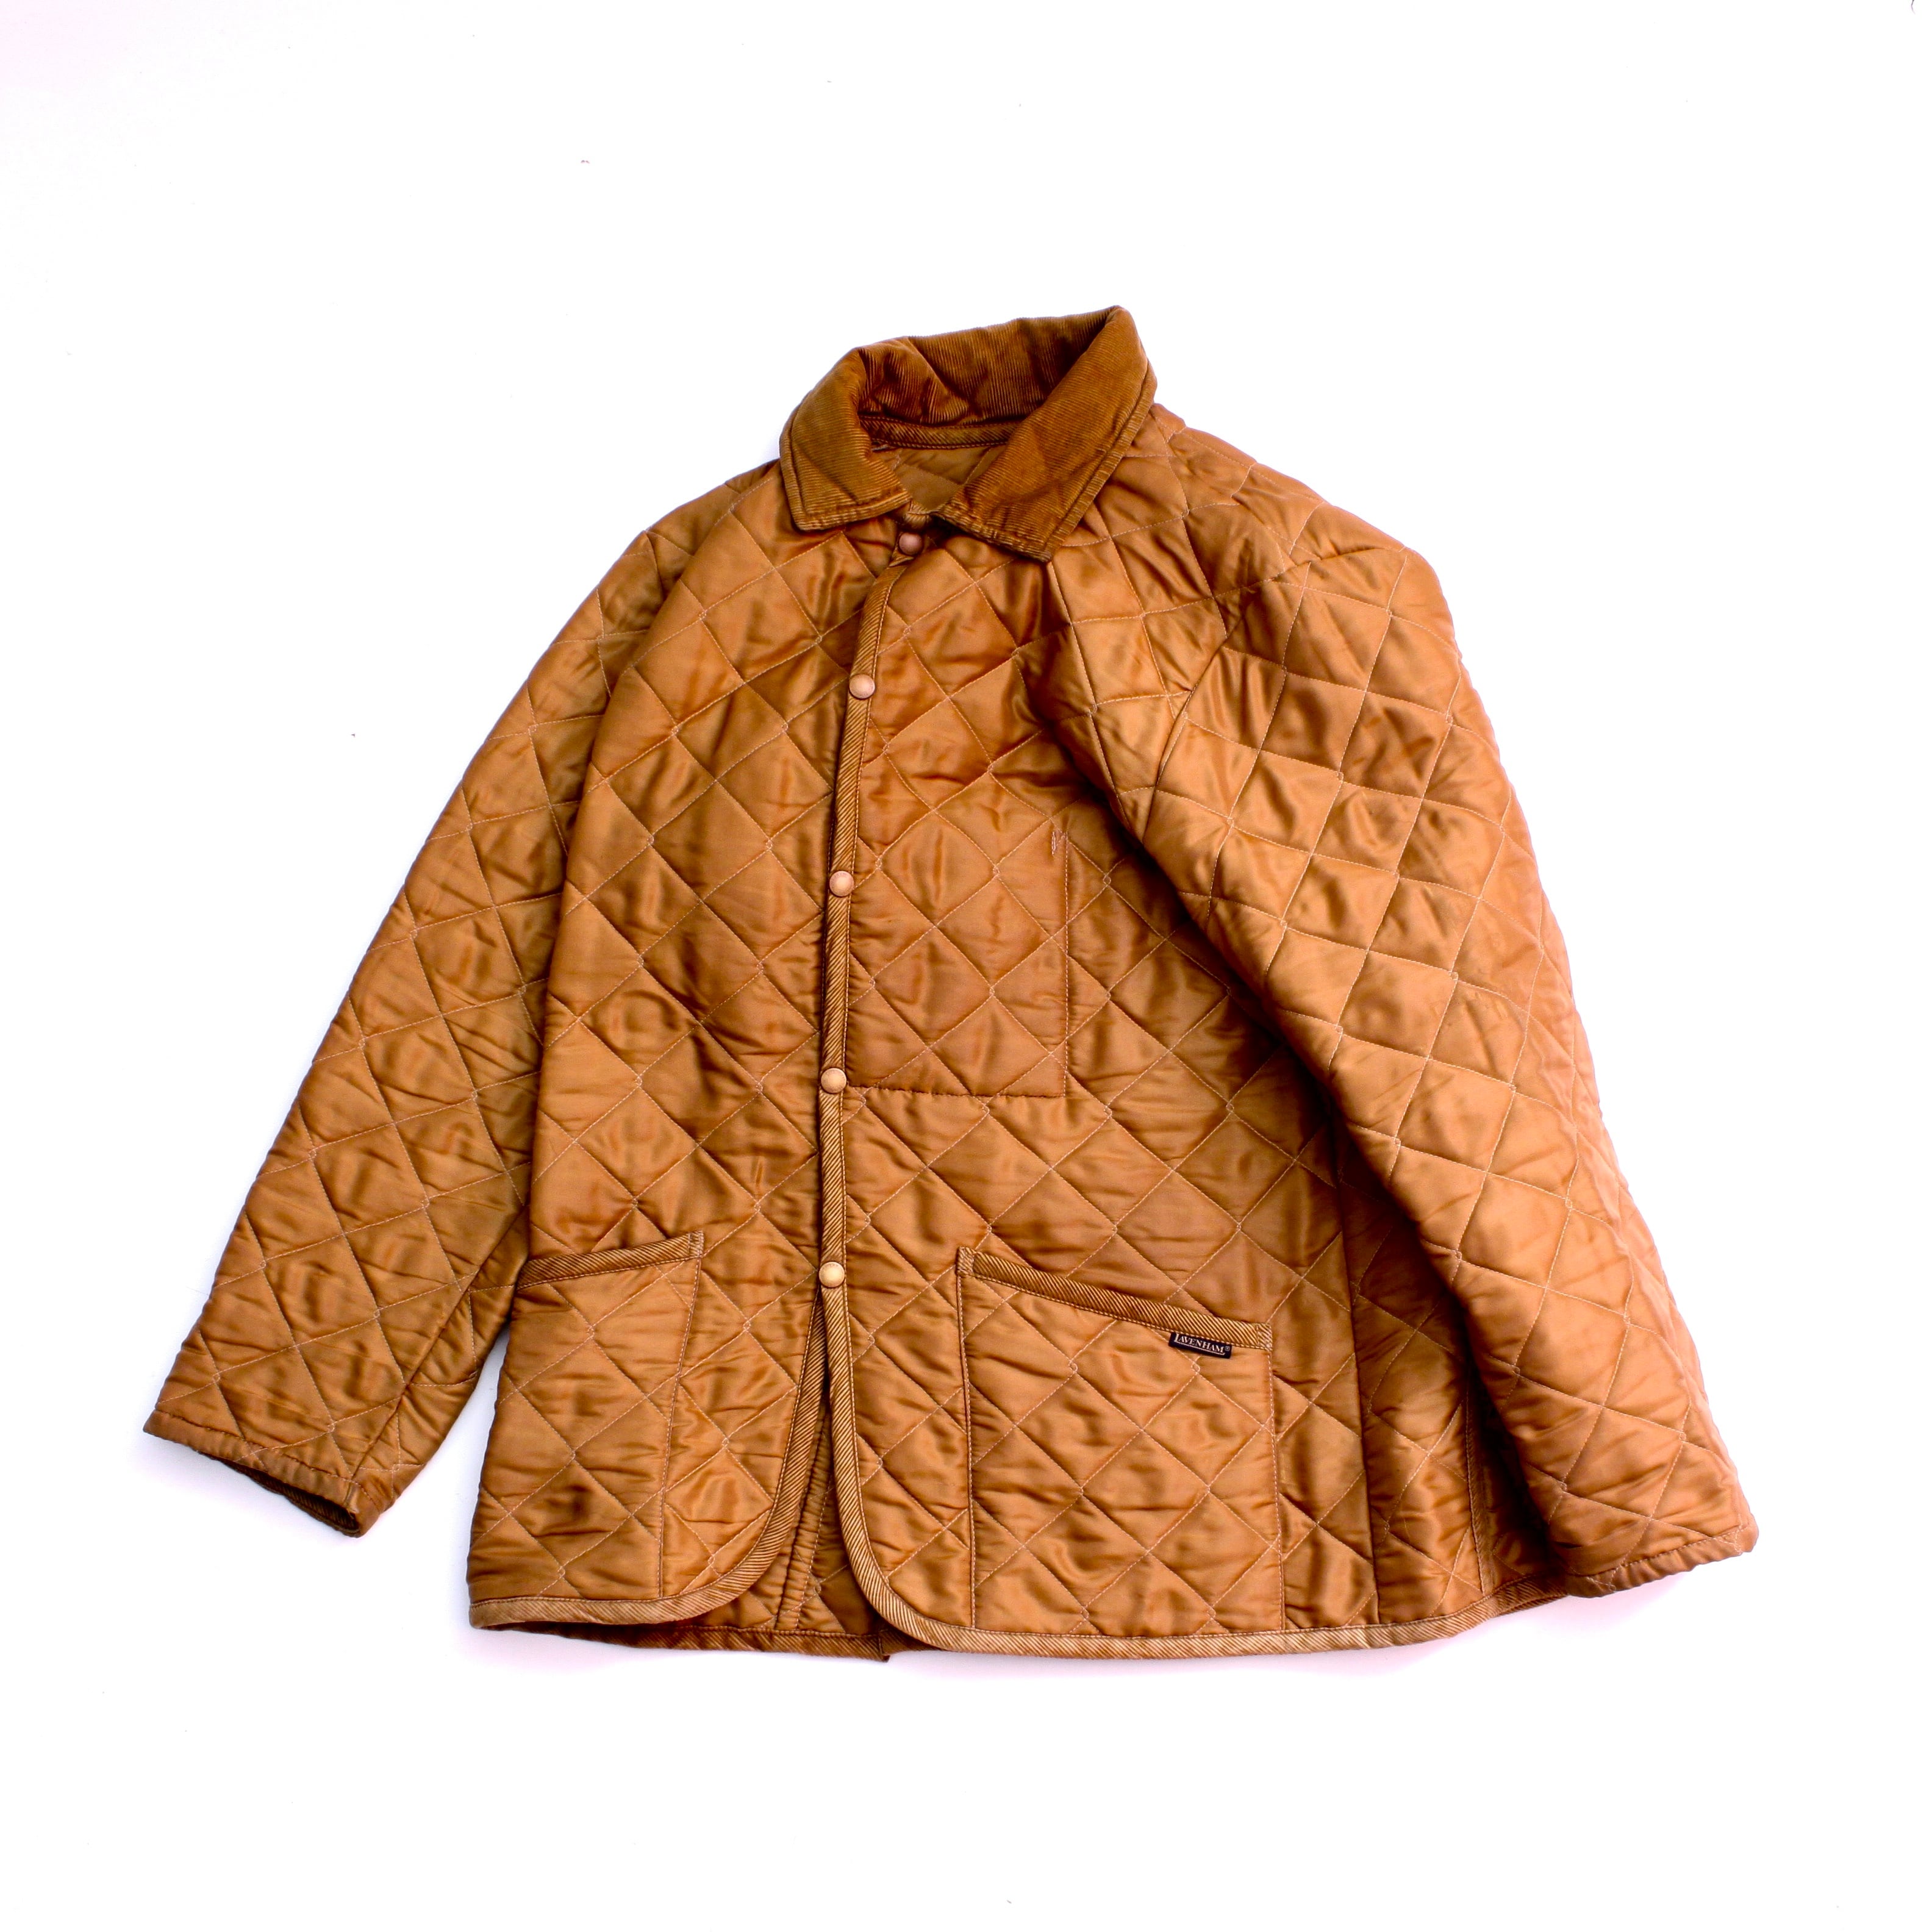 0700. 1990's LAVENHAM Quilting jacket Made in ENGLAND gold